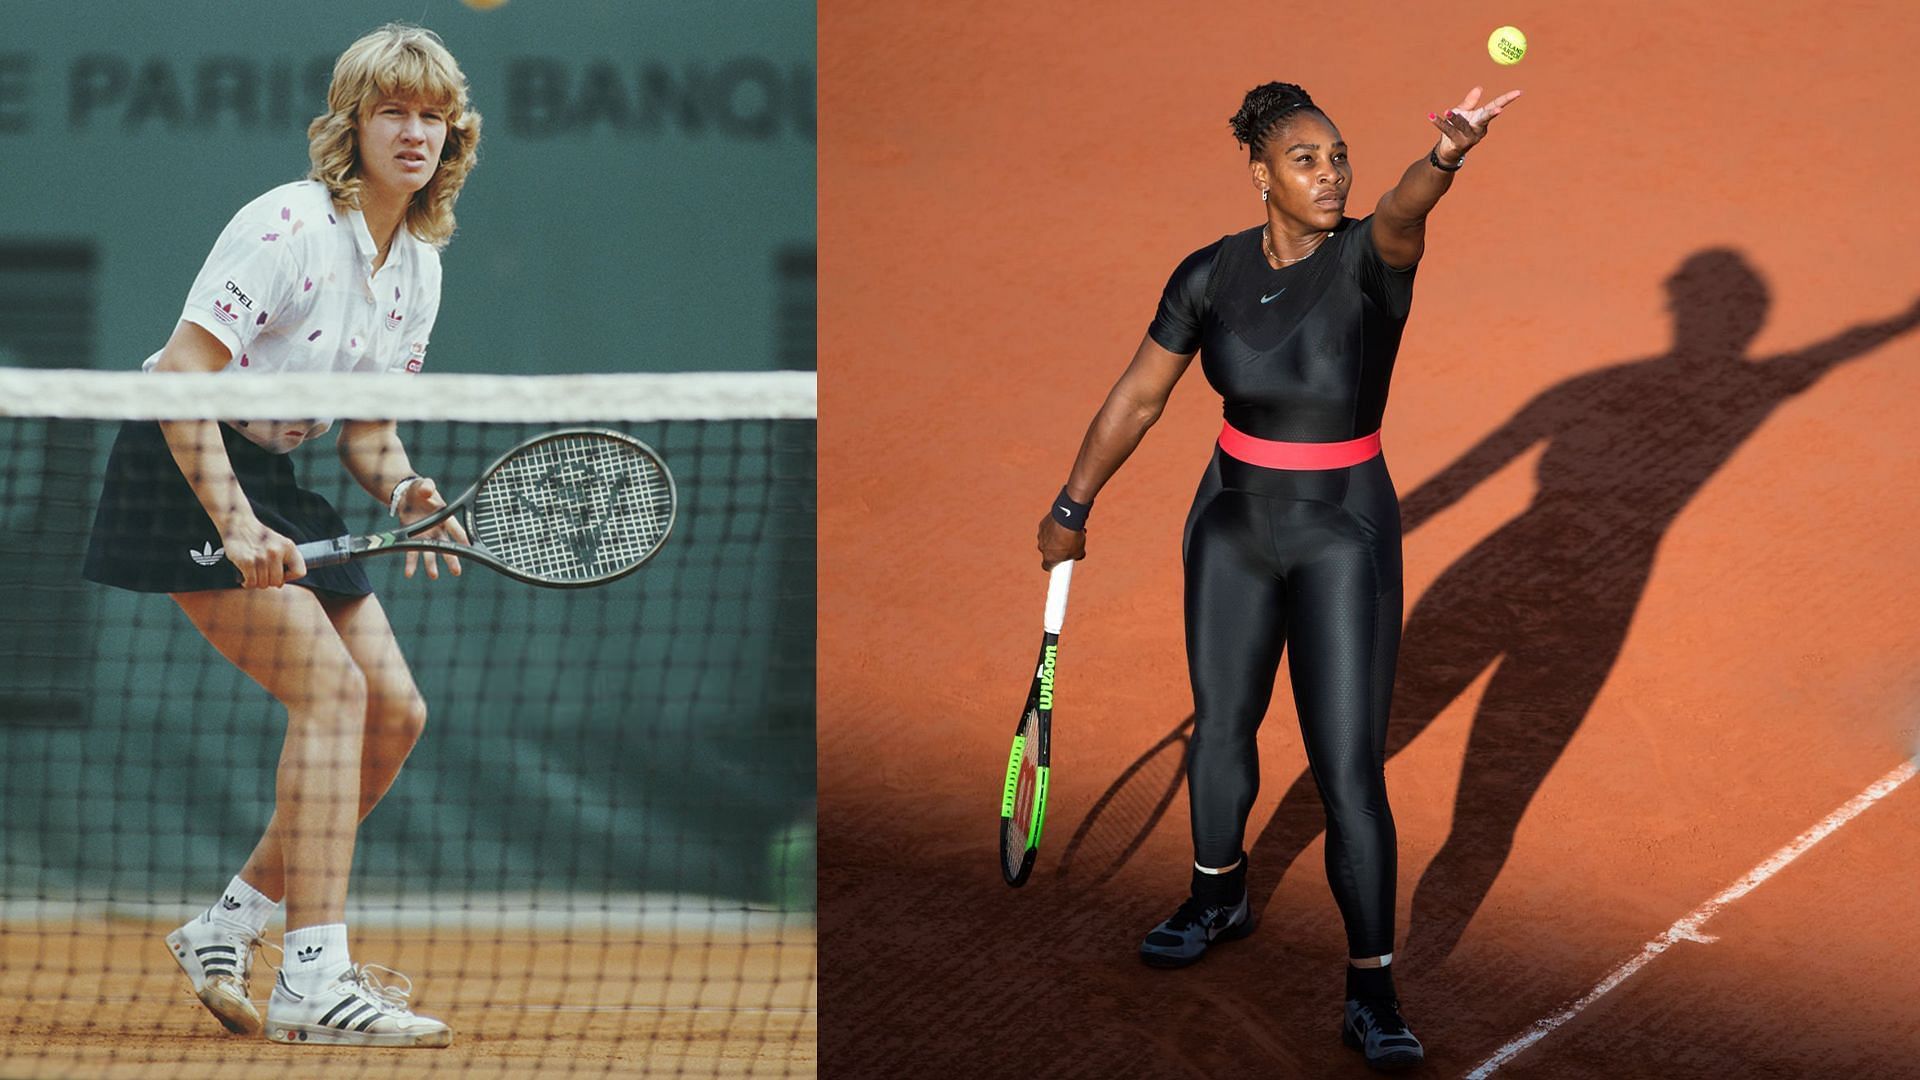 Both Graf and Serena are genuine contenders for the GOAT title among women